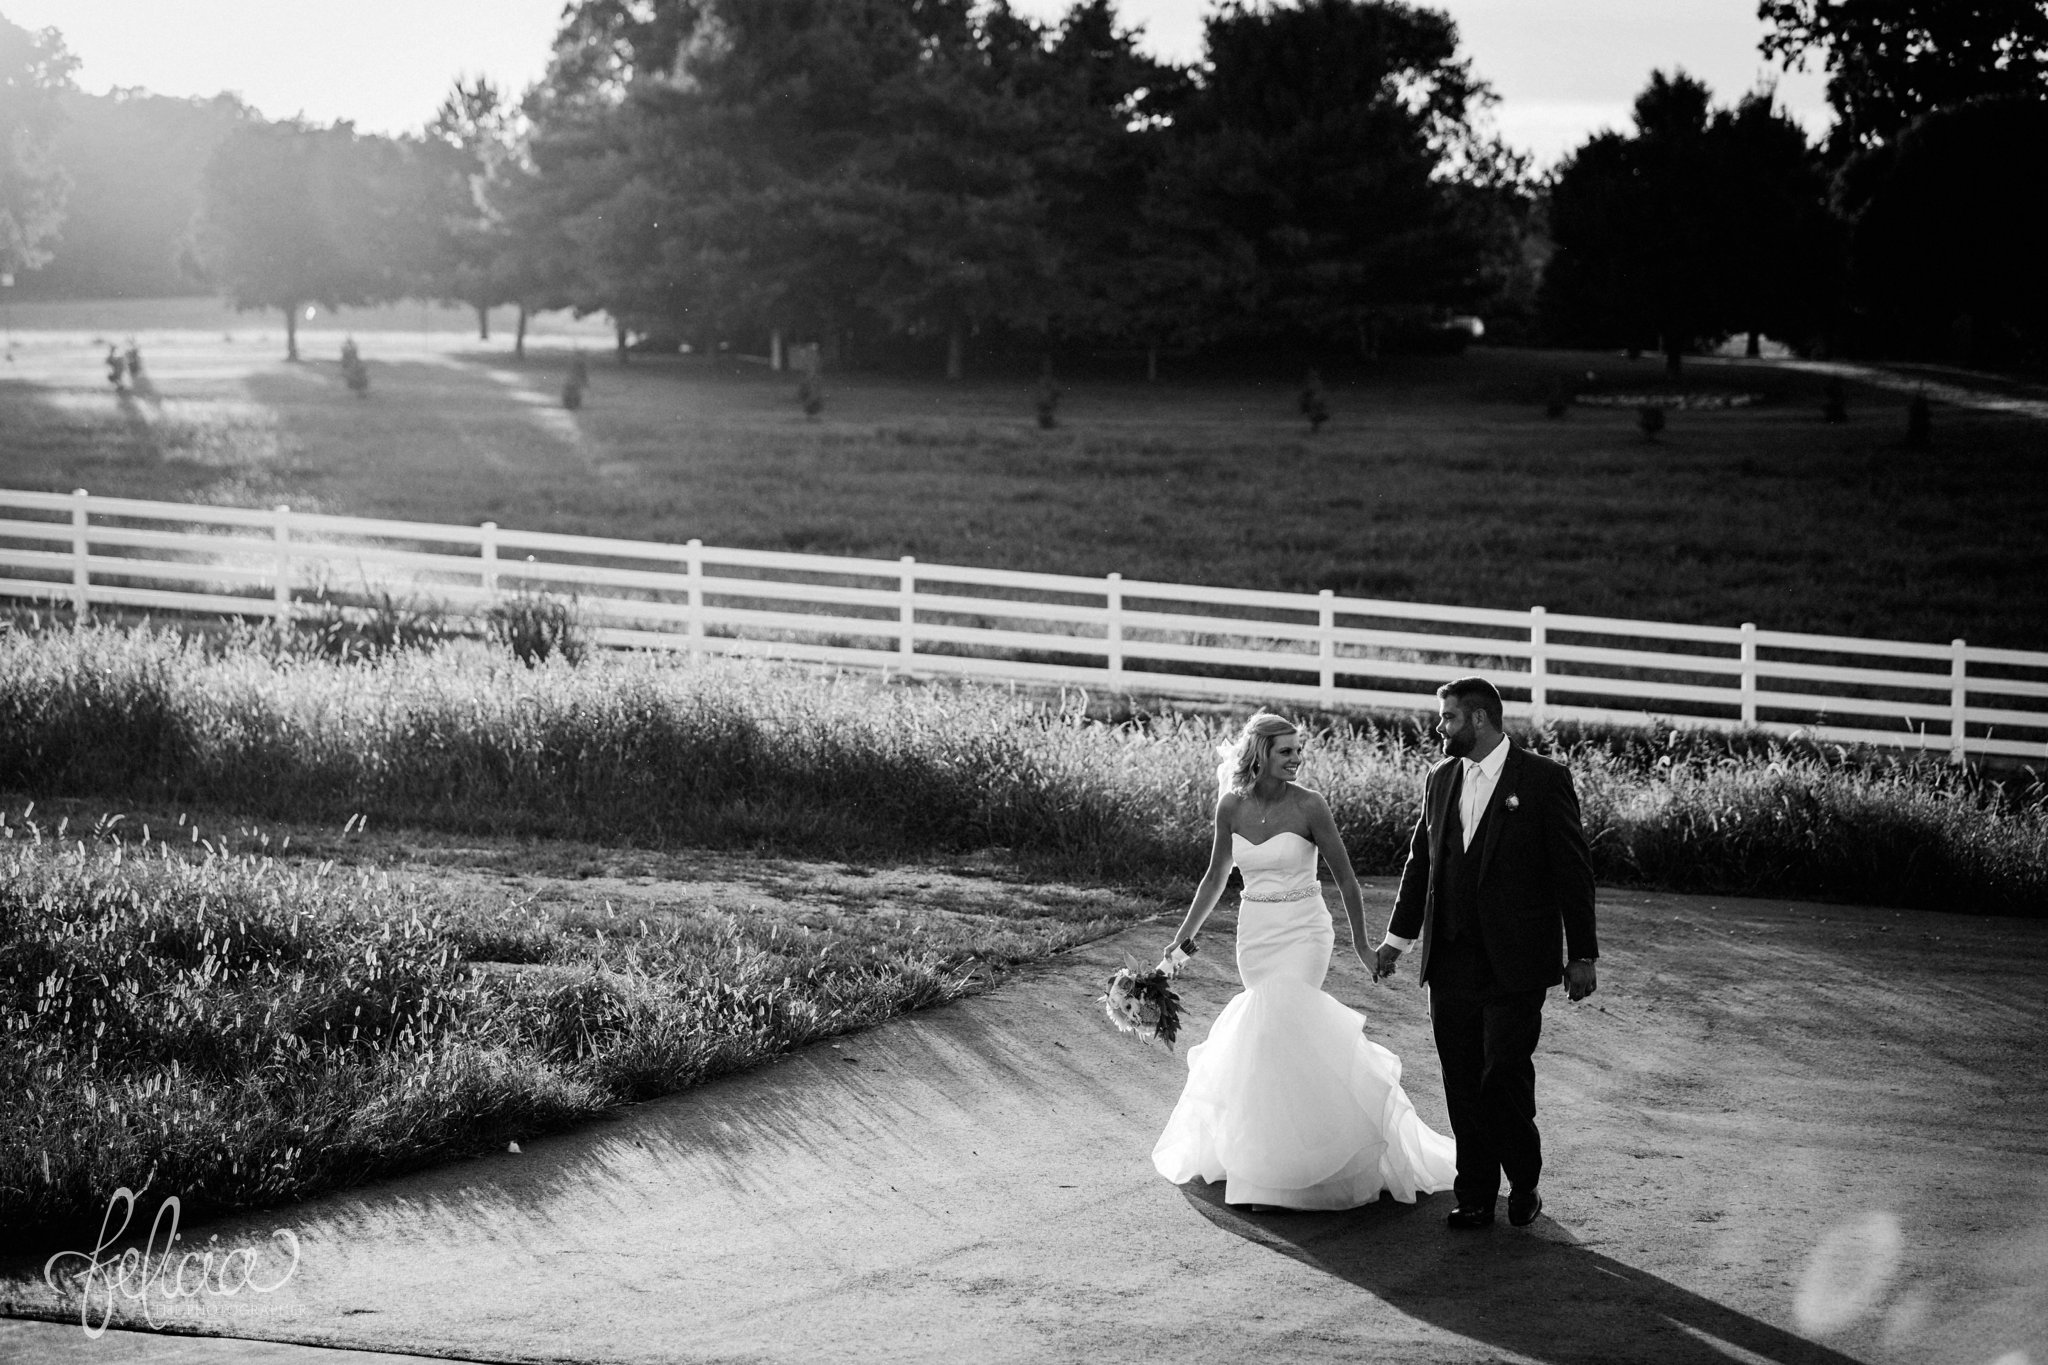 Bride and Groom | Photography | Black and White | Walking | White Picket Fence | Eighteen Ninety | Kansas City Wedding Venue | Felicia The Photographer